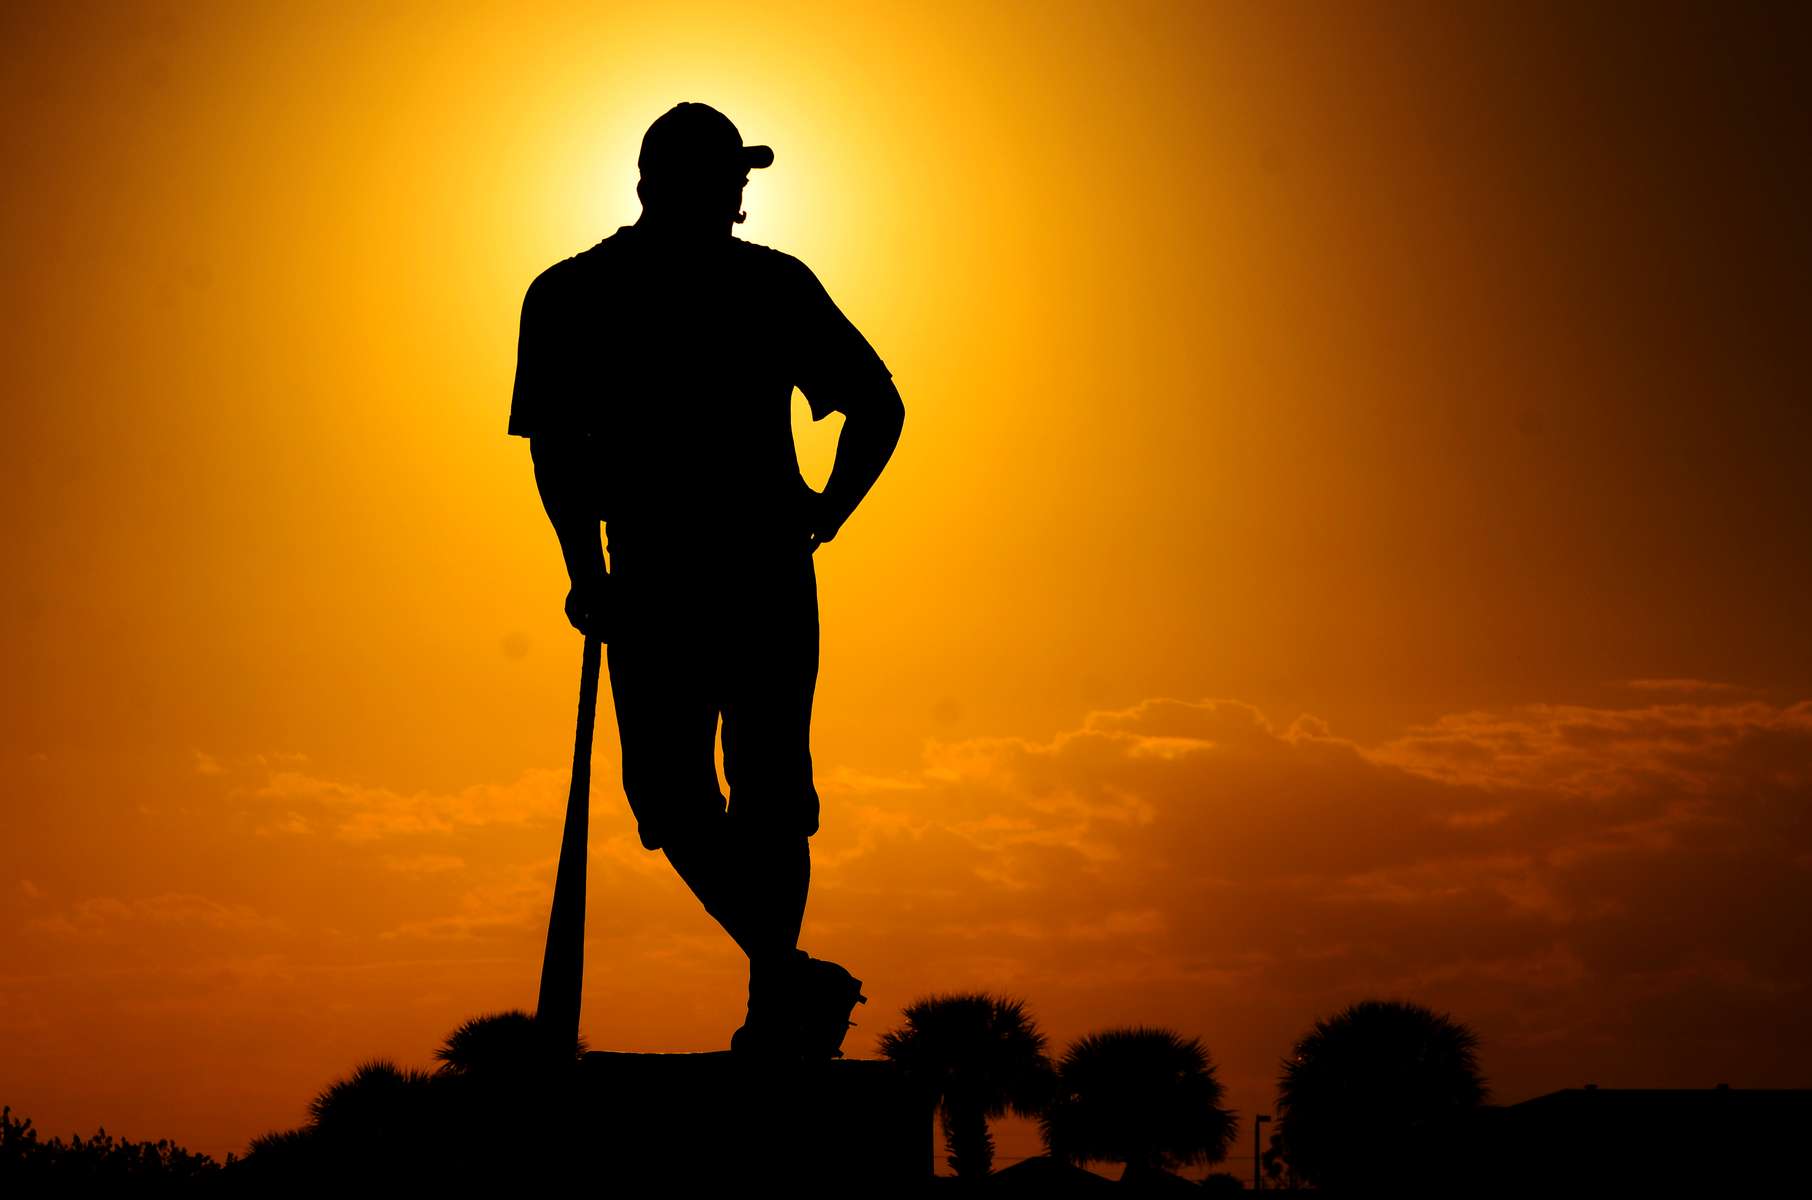 The sun sets behind a statue outside Space Coast Stadium on Sunday, March 2, 2014 in Melbourne, Fla after the Washington Nationals beat the Miami Marlins 10-3 in Spring Training.